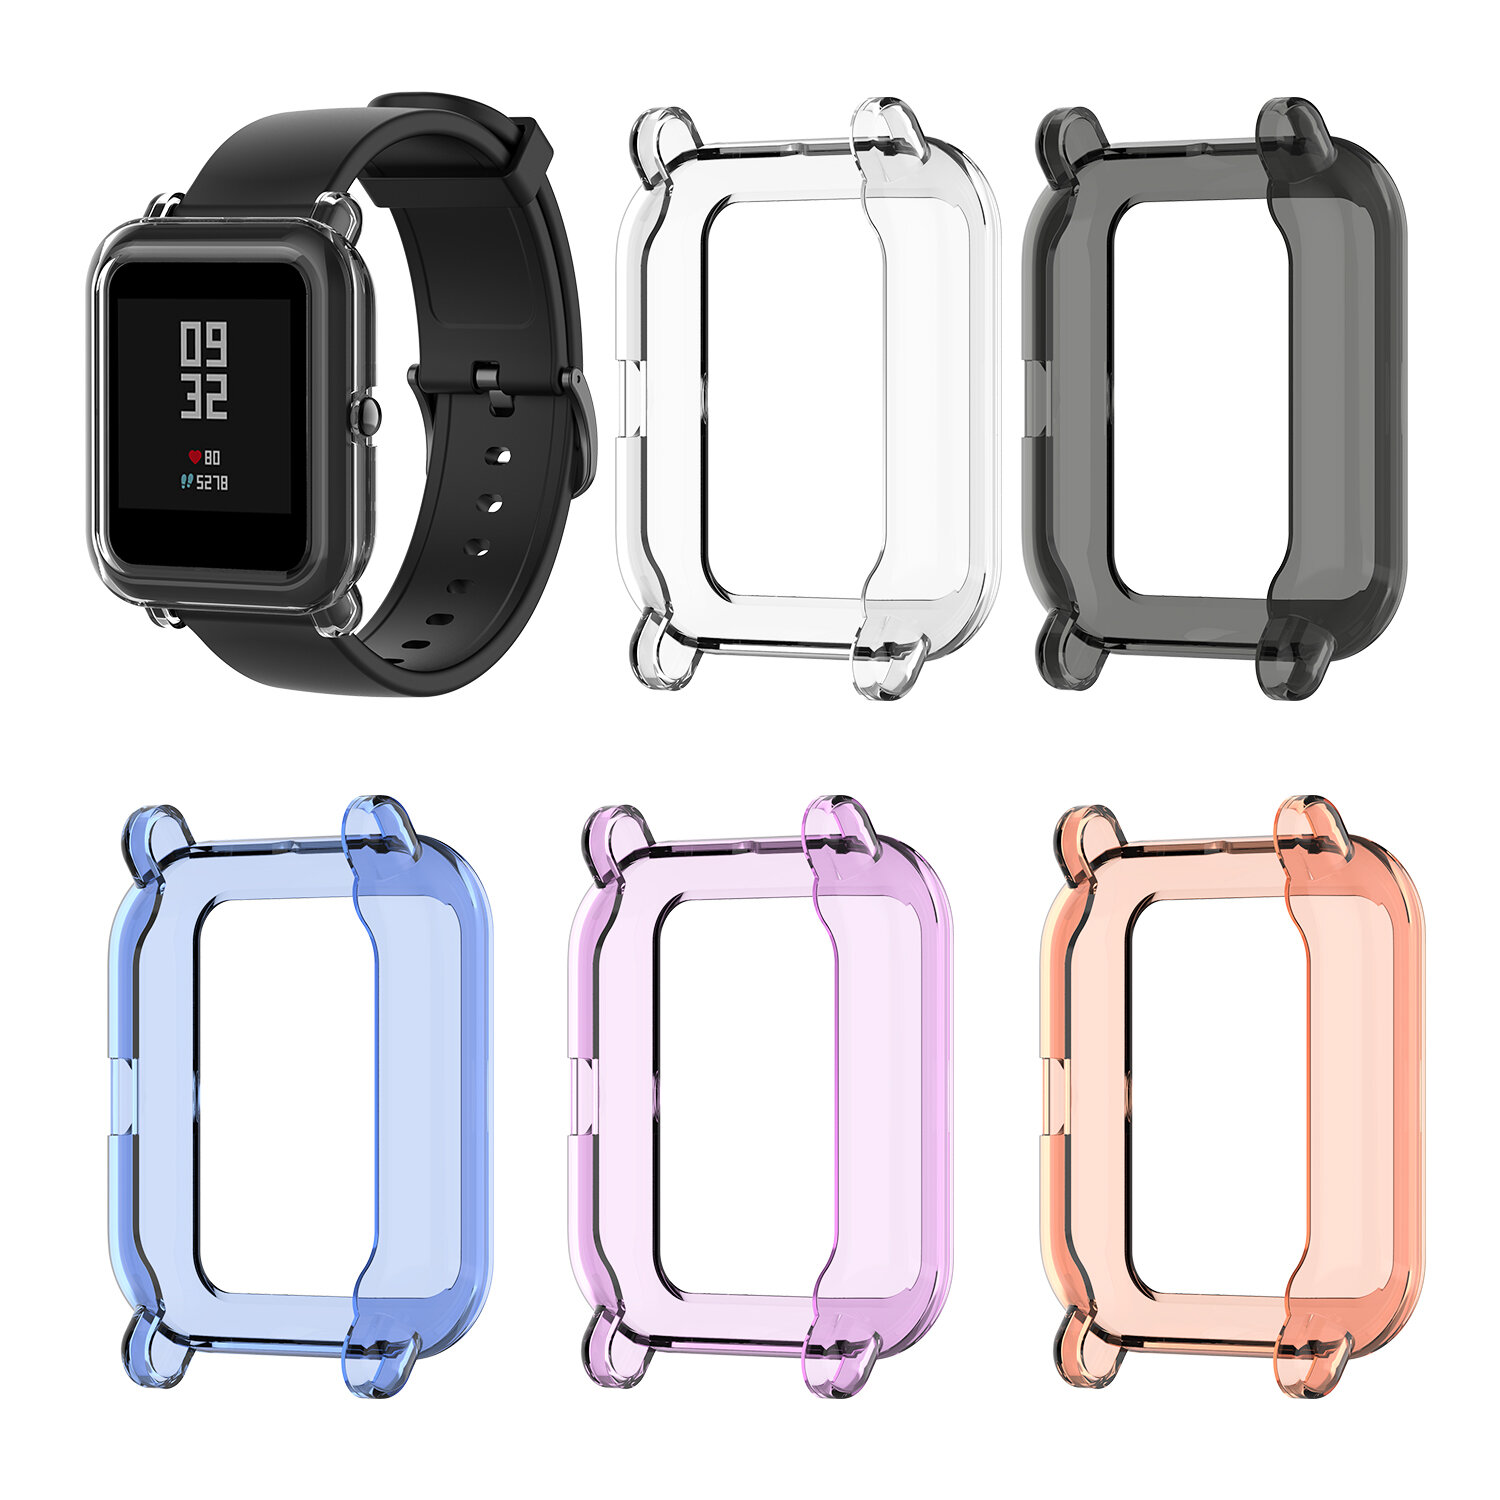 

Bakeey TPU Transparent Watch Case Cover Watch Protector For Amazfit Bip Pace Youth